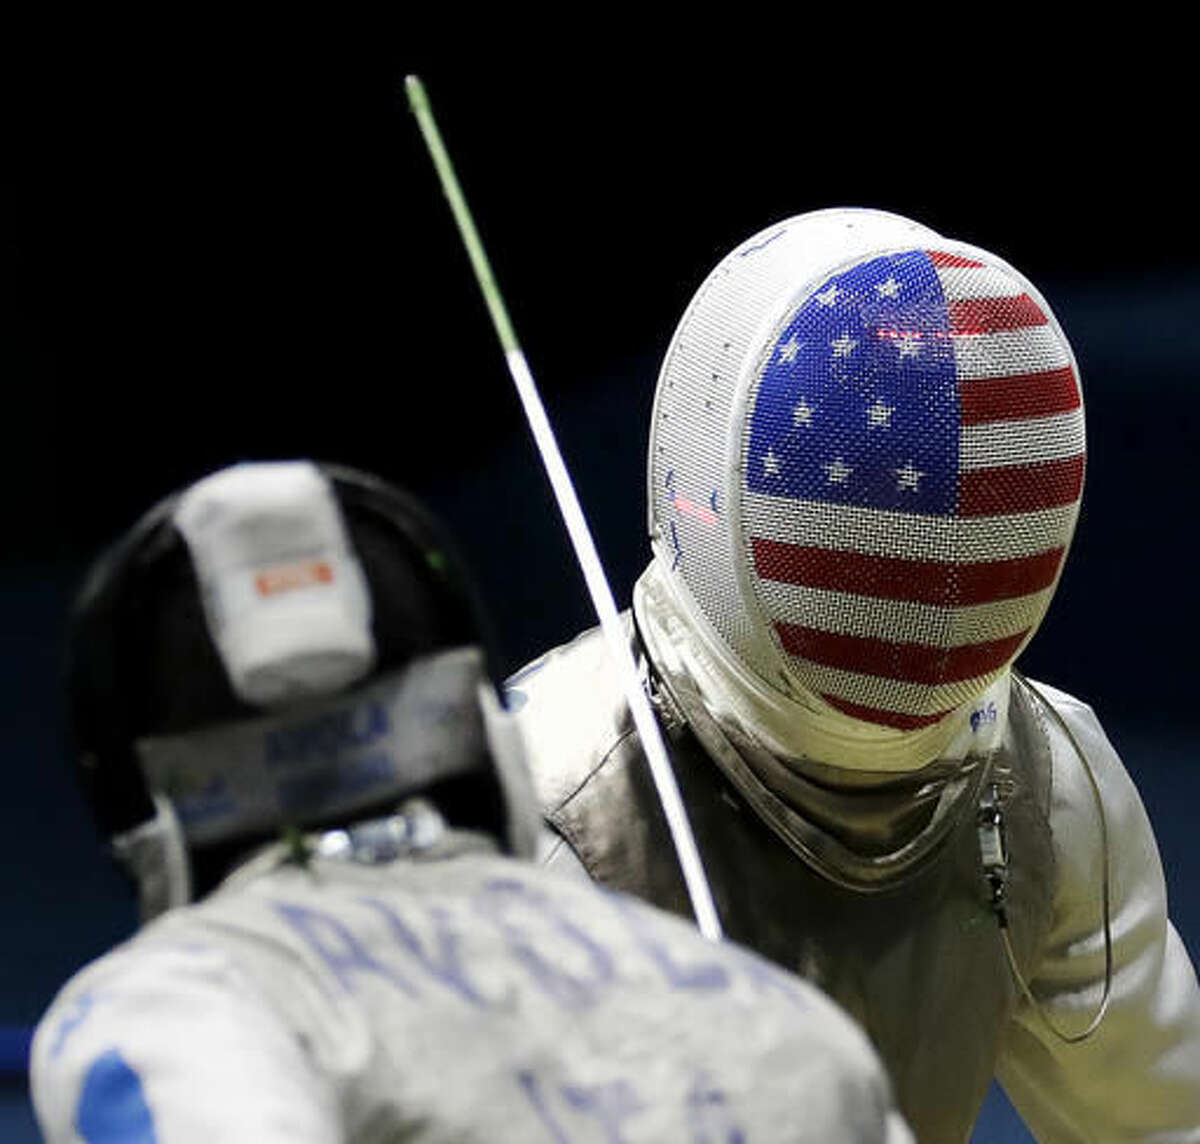 Alexander Massialas, of the United States, competes against Italy's Giorgio Avola in a men's individual foil fencing quarterfinal at the 2016 Summer Olympics in Rio de Janeiro, Brazil, Sunday, Aug. 7, 2016. (AP Photo/Charlie Riedel)